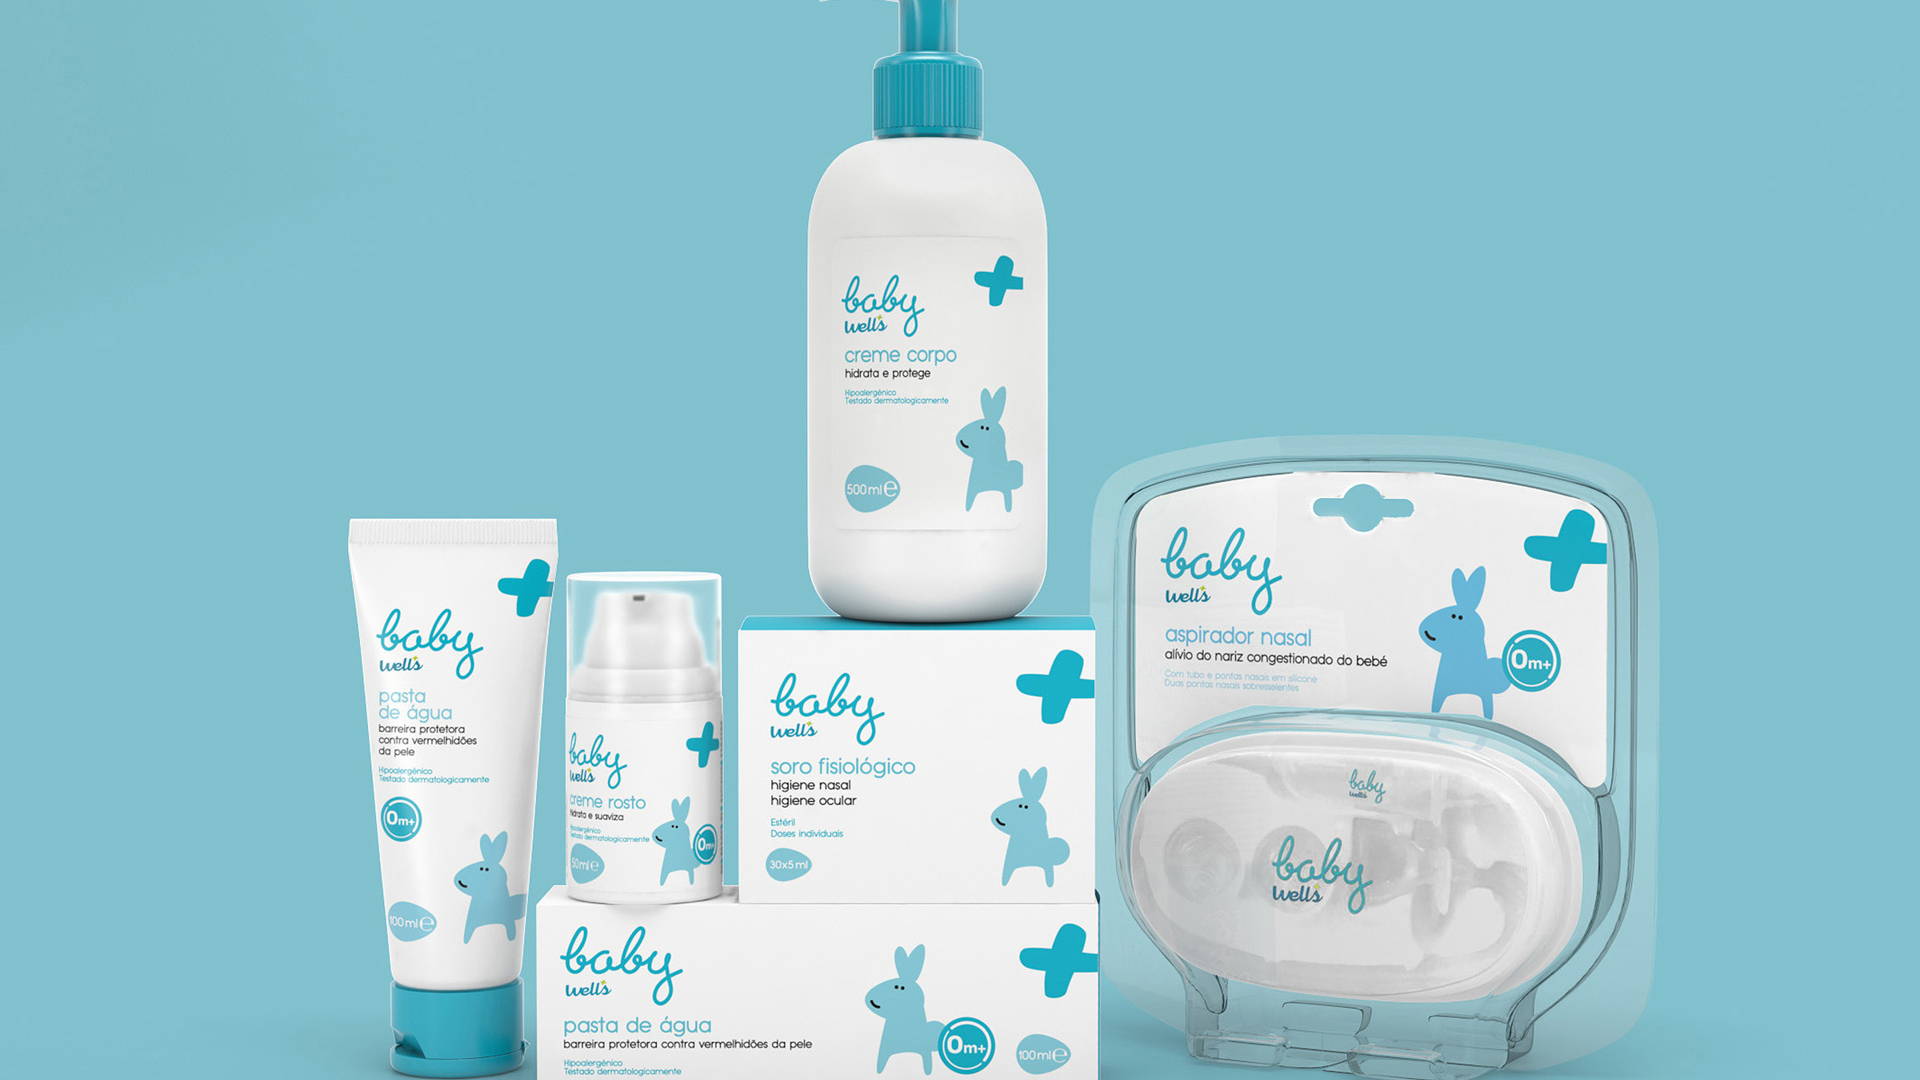 Featured image for This Range of Baby Care Comes With a Clean Yet Adorable Look